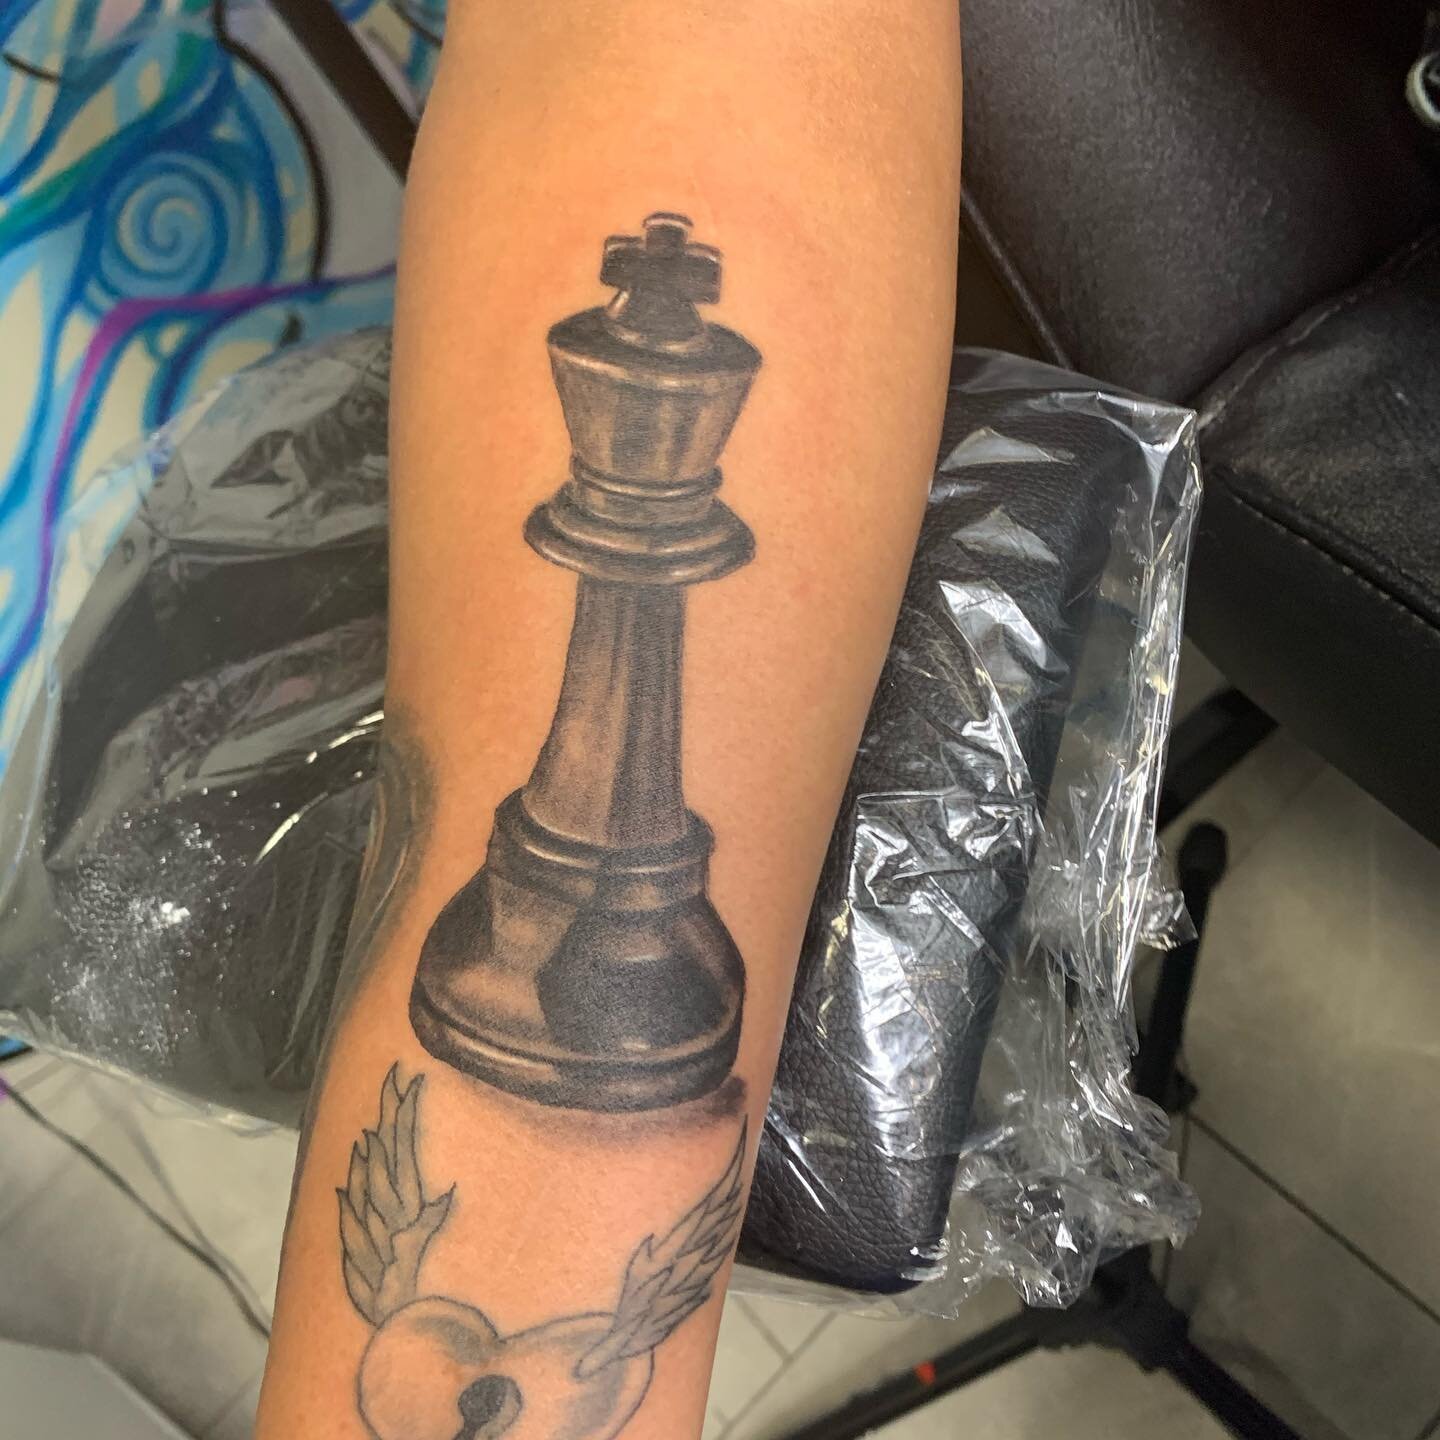 #checkmate #chess #king #chesspiece #blackandgreytattoo #blackandgrey #Houston #houstontx #houstontattooartist #slangingink